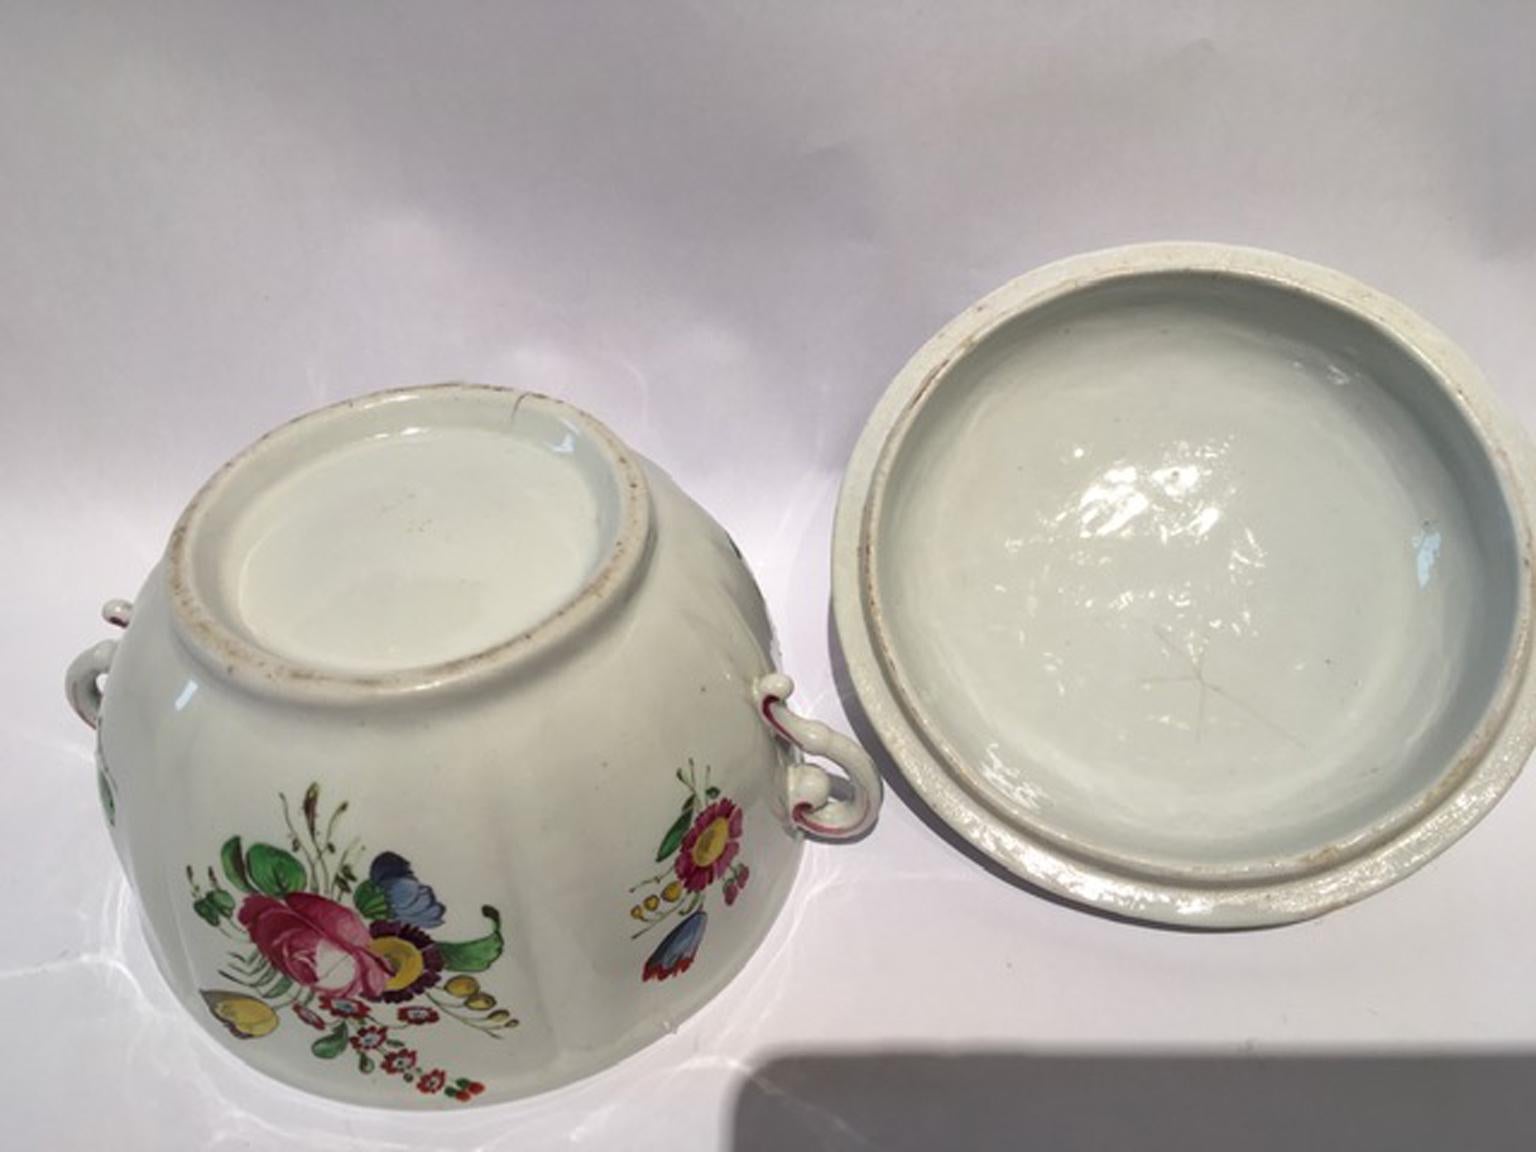 Italy 18th Century Richard Ginori Porcelain Covered Cup or Sugar Bowl For Sale 2